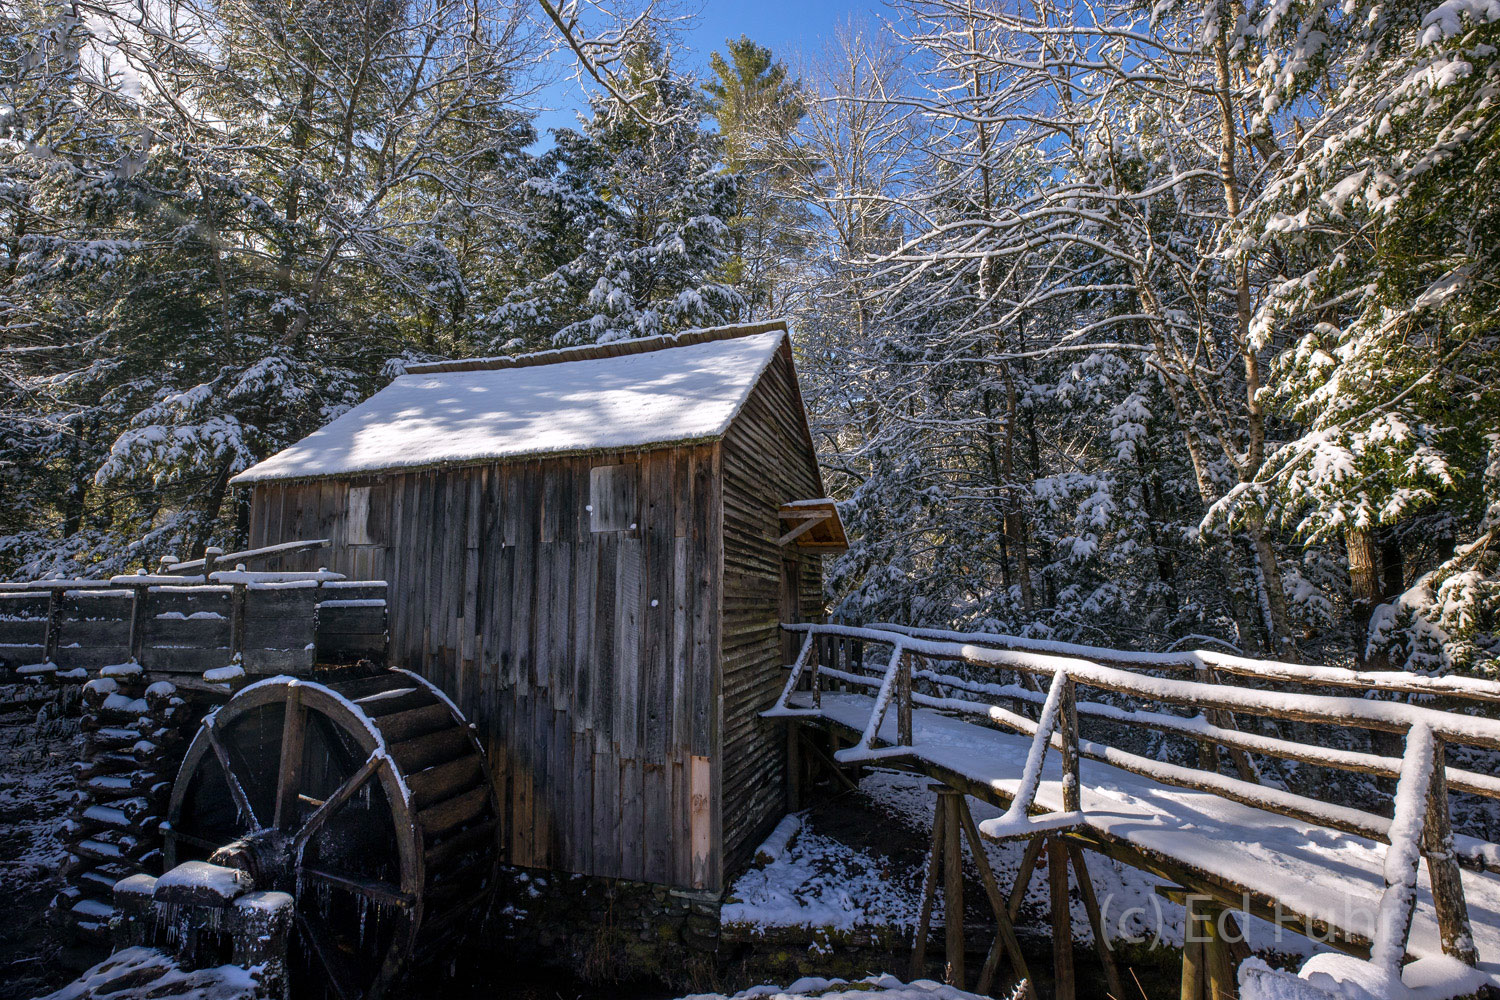 This ancient mill where settlers in the Cove had corn meal and flour ground stands eerily quiet in the snowy solitude of winter...